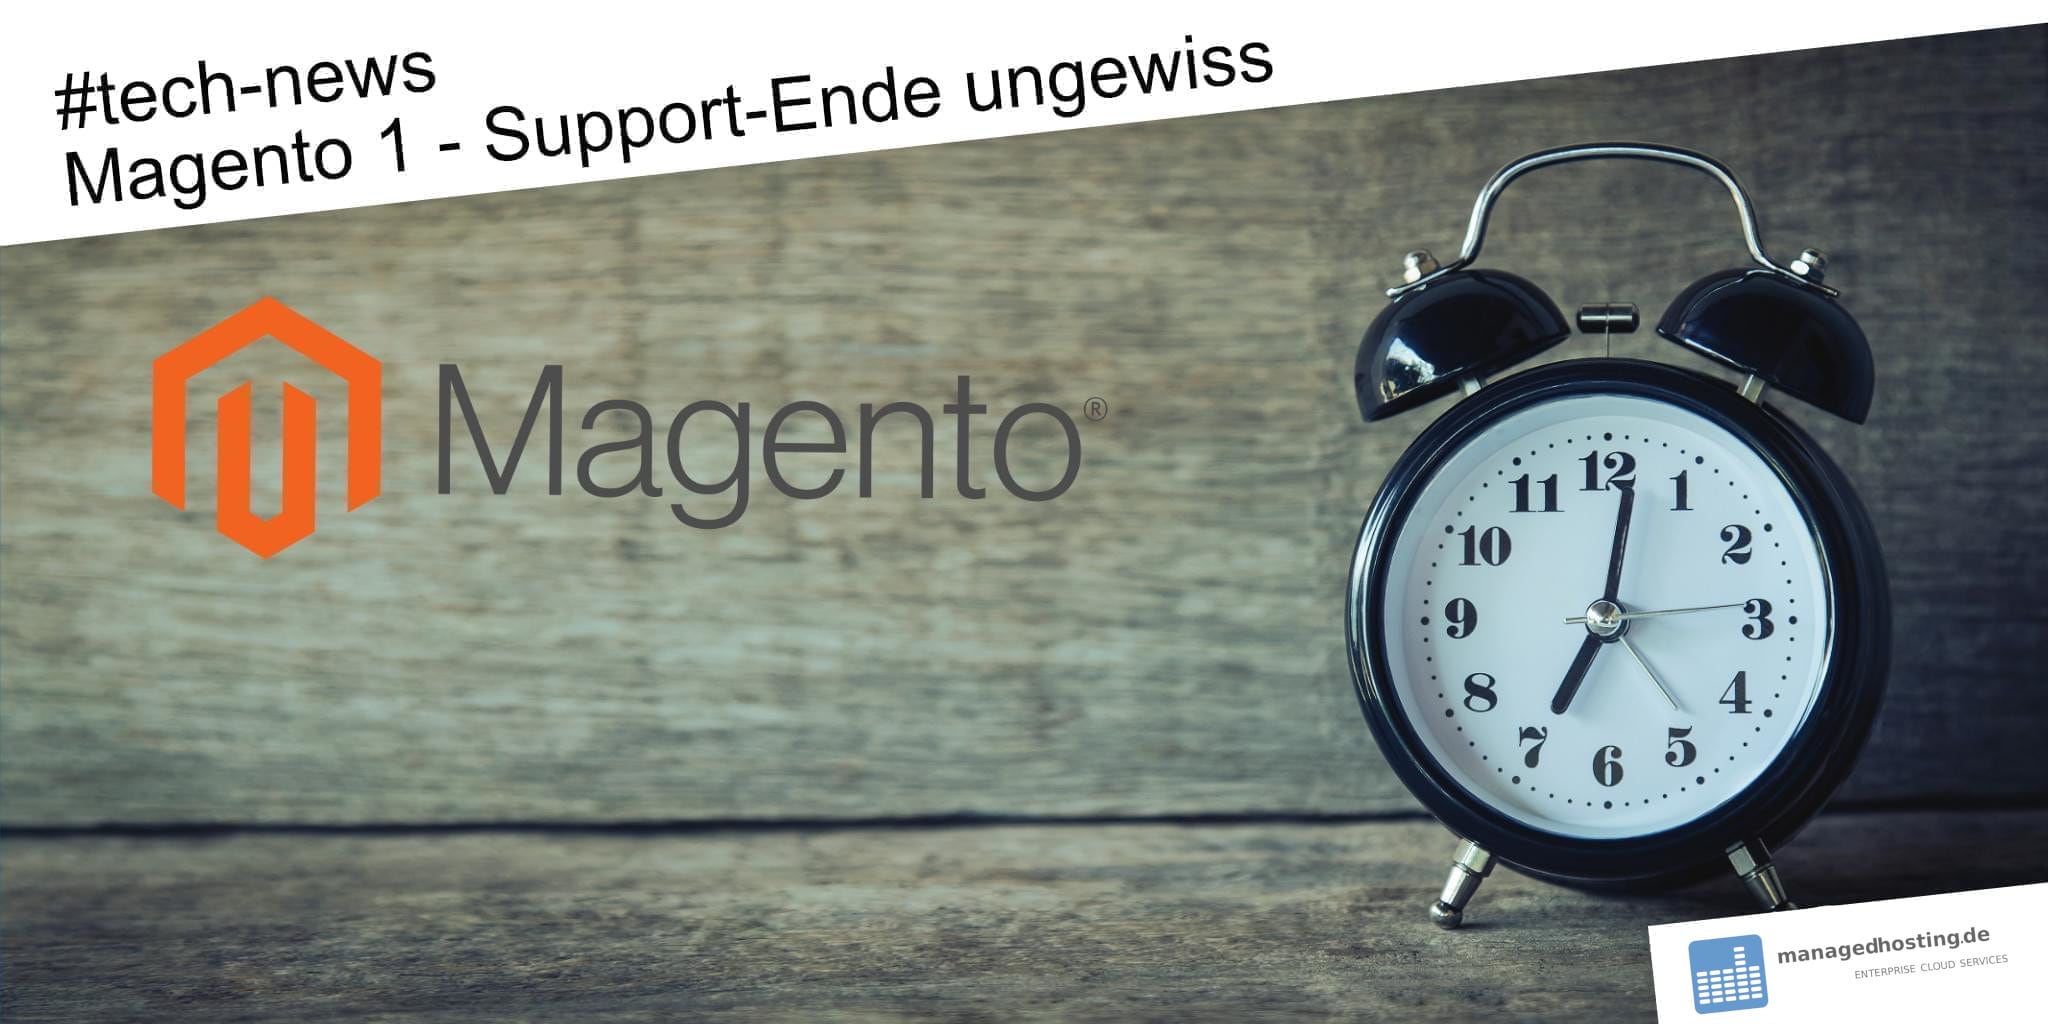 Magento Support-Ende